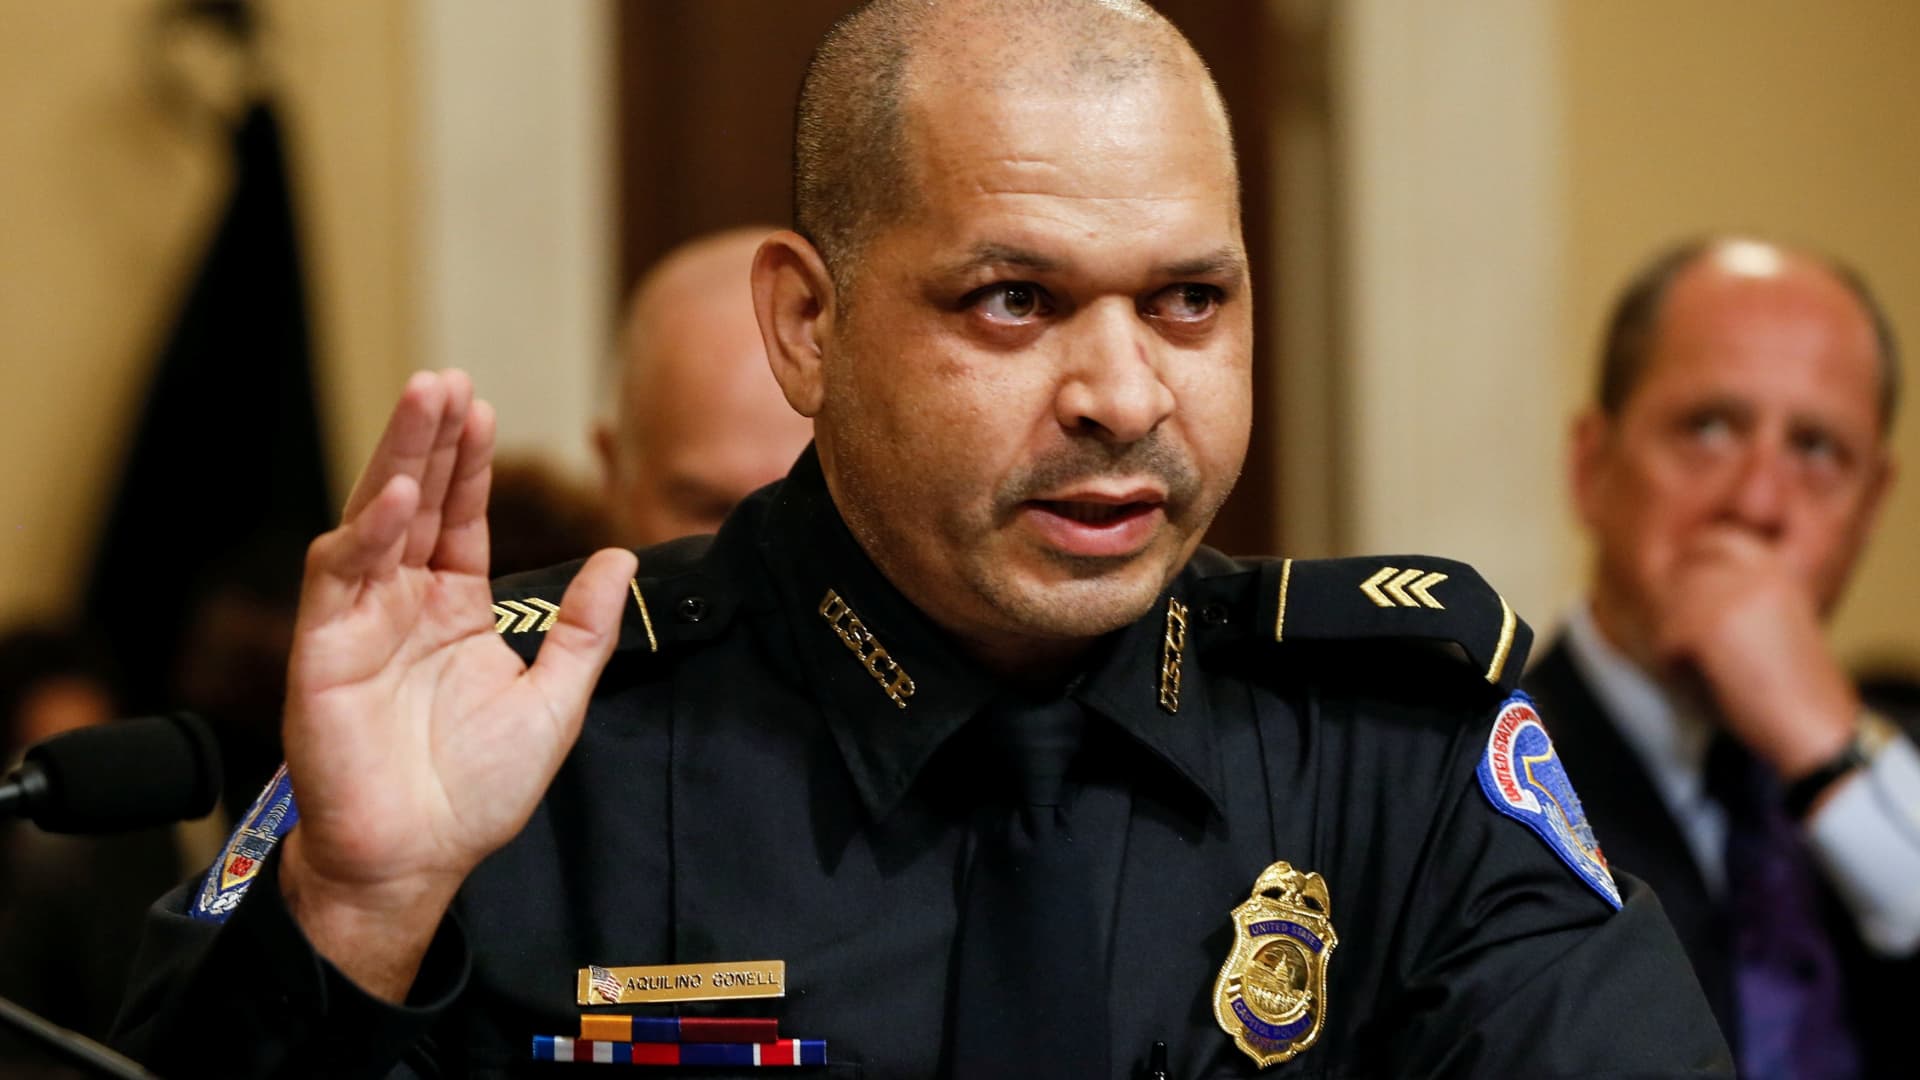 U.S. Capitol Police sergeant Aquilino Gonell Gonell speaks about how he has repeatedly taken an oath as an American citizen to protect the US constitution as he testifies during the opening hearing of the U.S. House (Select) Committee investigating the January 6 attack on the U.S. Capitol, on Capitol Hill in Washington, U.S., July 27, 2021. REUTERS/Jim Bourg/Pool